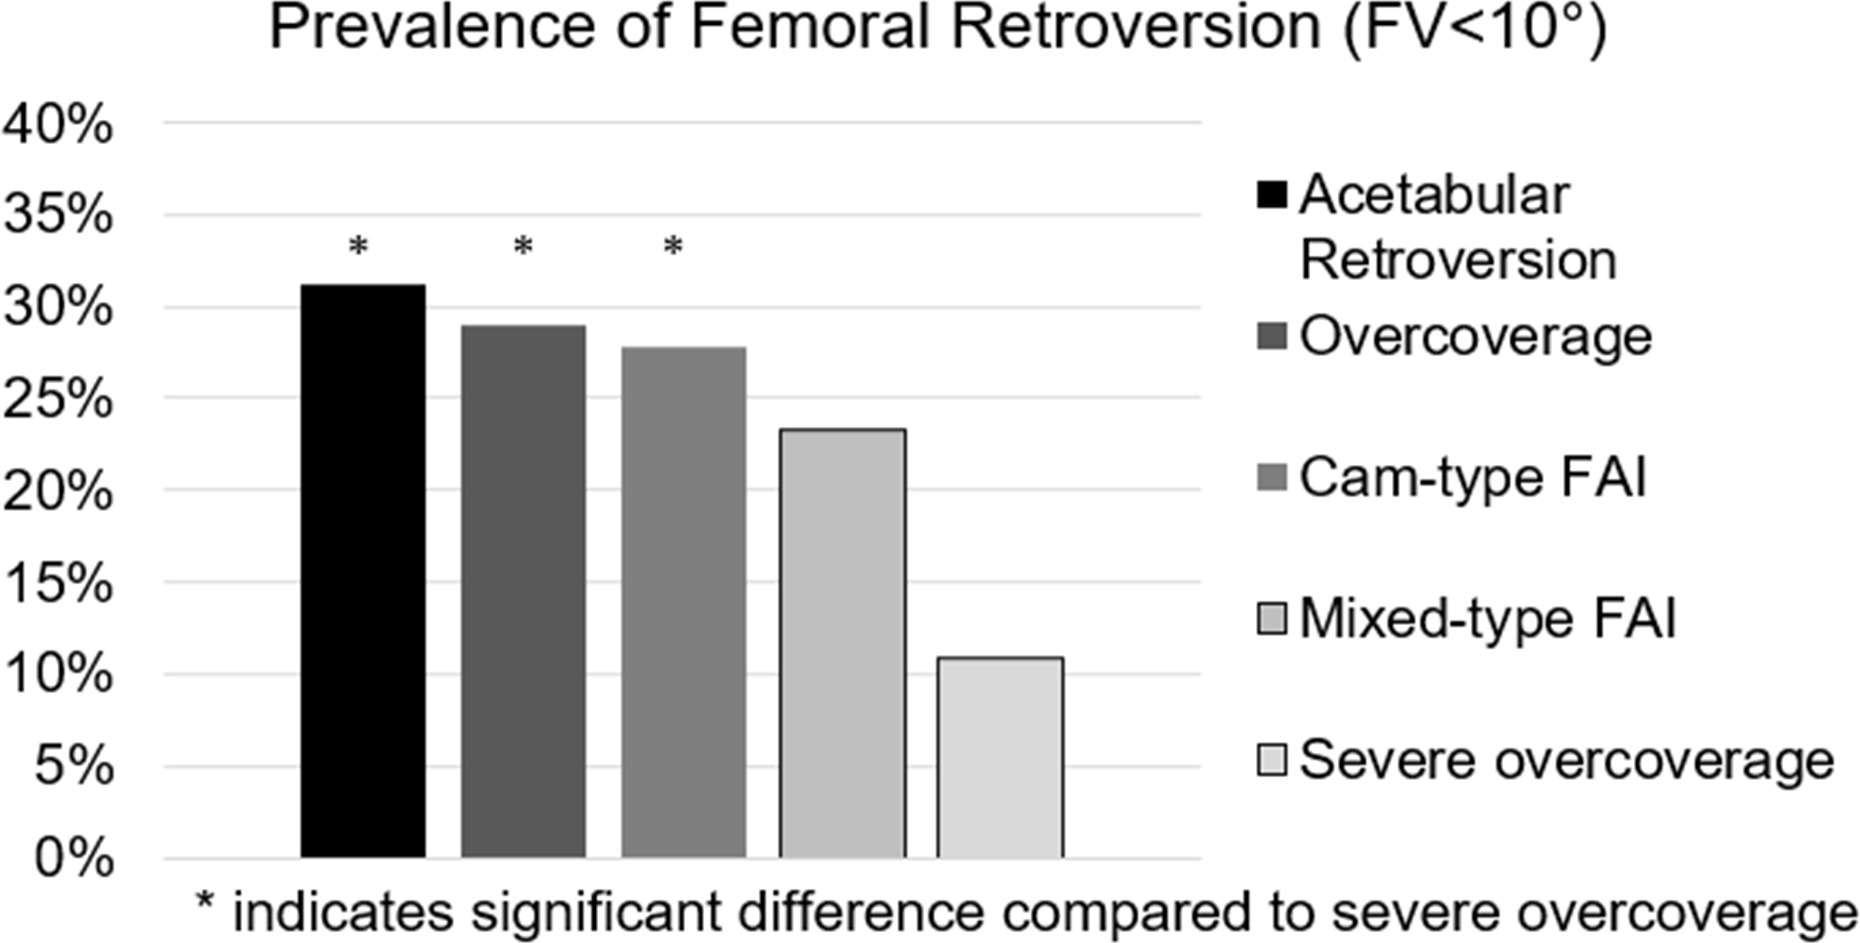 Fig. 3 
          Frequency of decreased femoral retroversion (FV) < 10° is shown for the five groups of patients with subtypes of femoroacetabular impingement (FAI). A significantly (p < 0.001, chi-squared test) higher frequency of decreased FV < 10° was detected for patients with cam-type FAI (28%), and for patients with over-coverage (29%) compared to patients with severe over-coverage (12%).
        